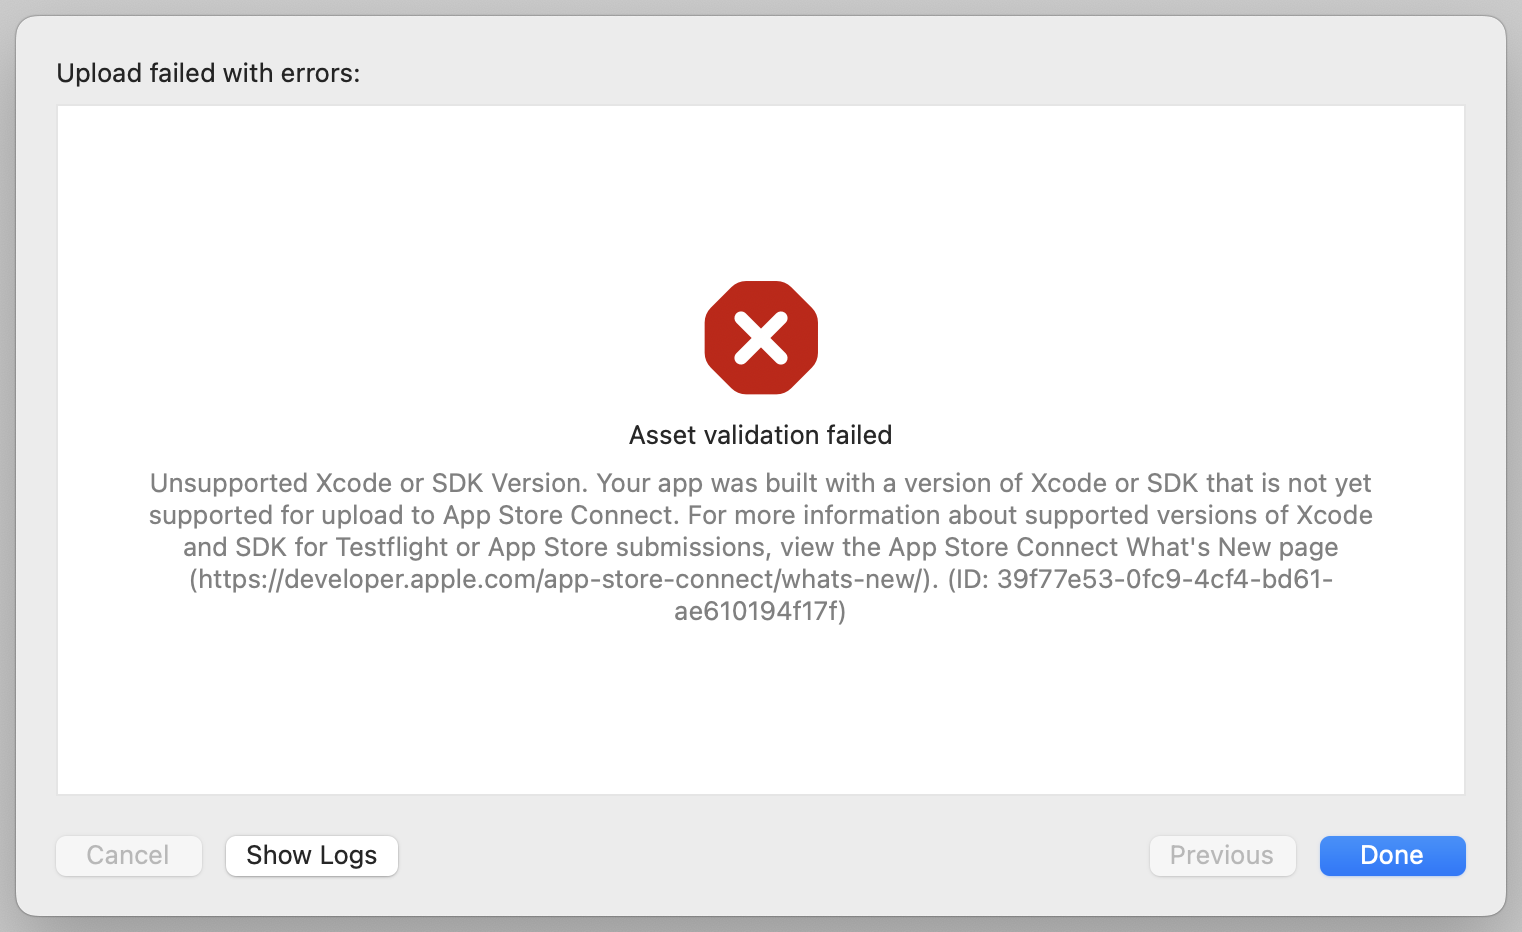 Screenshot from Xcode: Upload failed with errors: Asset validation failed: Unsupported Xcode or SDK Version. Your app was built with a version of Xcode or SDK that is not yet supported for upload to App Store Connect. For more information about supported versions of Xcode and SDK for Testflight or App Store submissions, view the App Store Connect What's New page (https://developer.apple.com/app-store-connect/whats-new/). (ID: 39f7753-0fc9-4cf4-bd61-ae610194f17f)